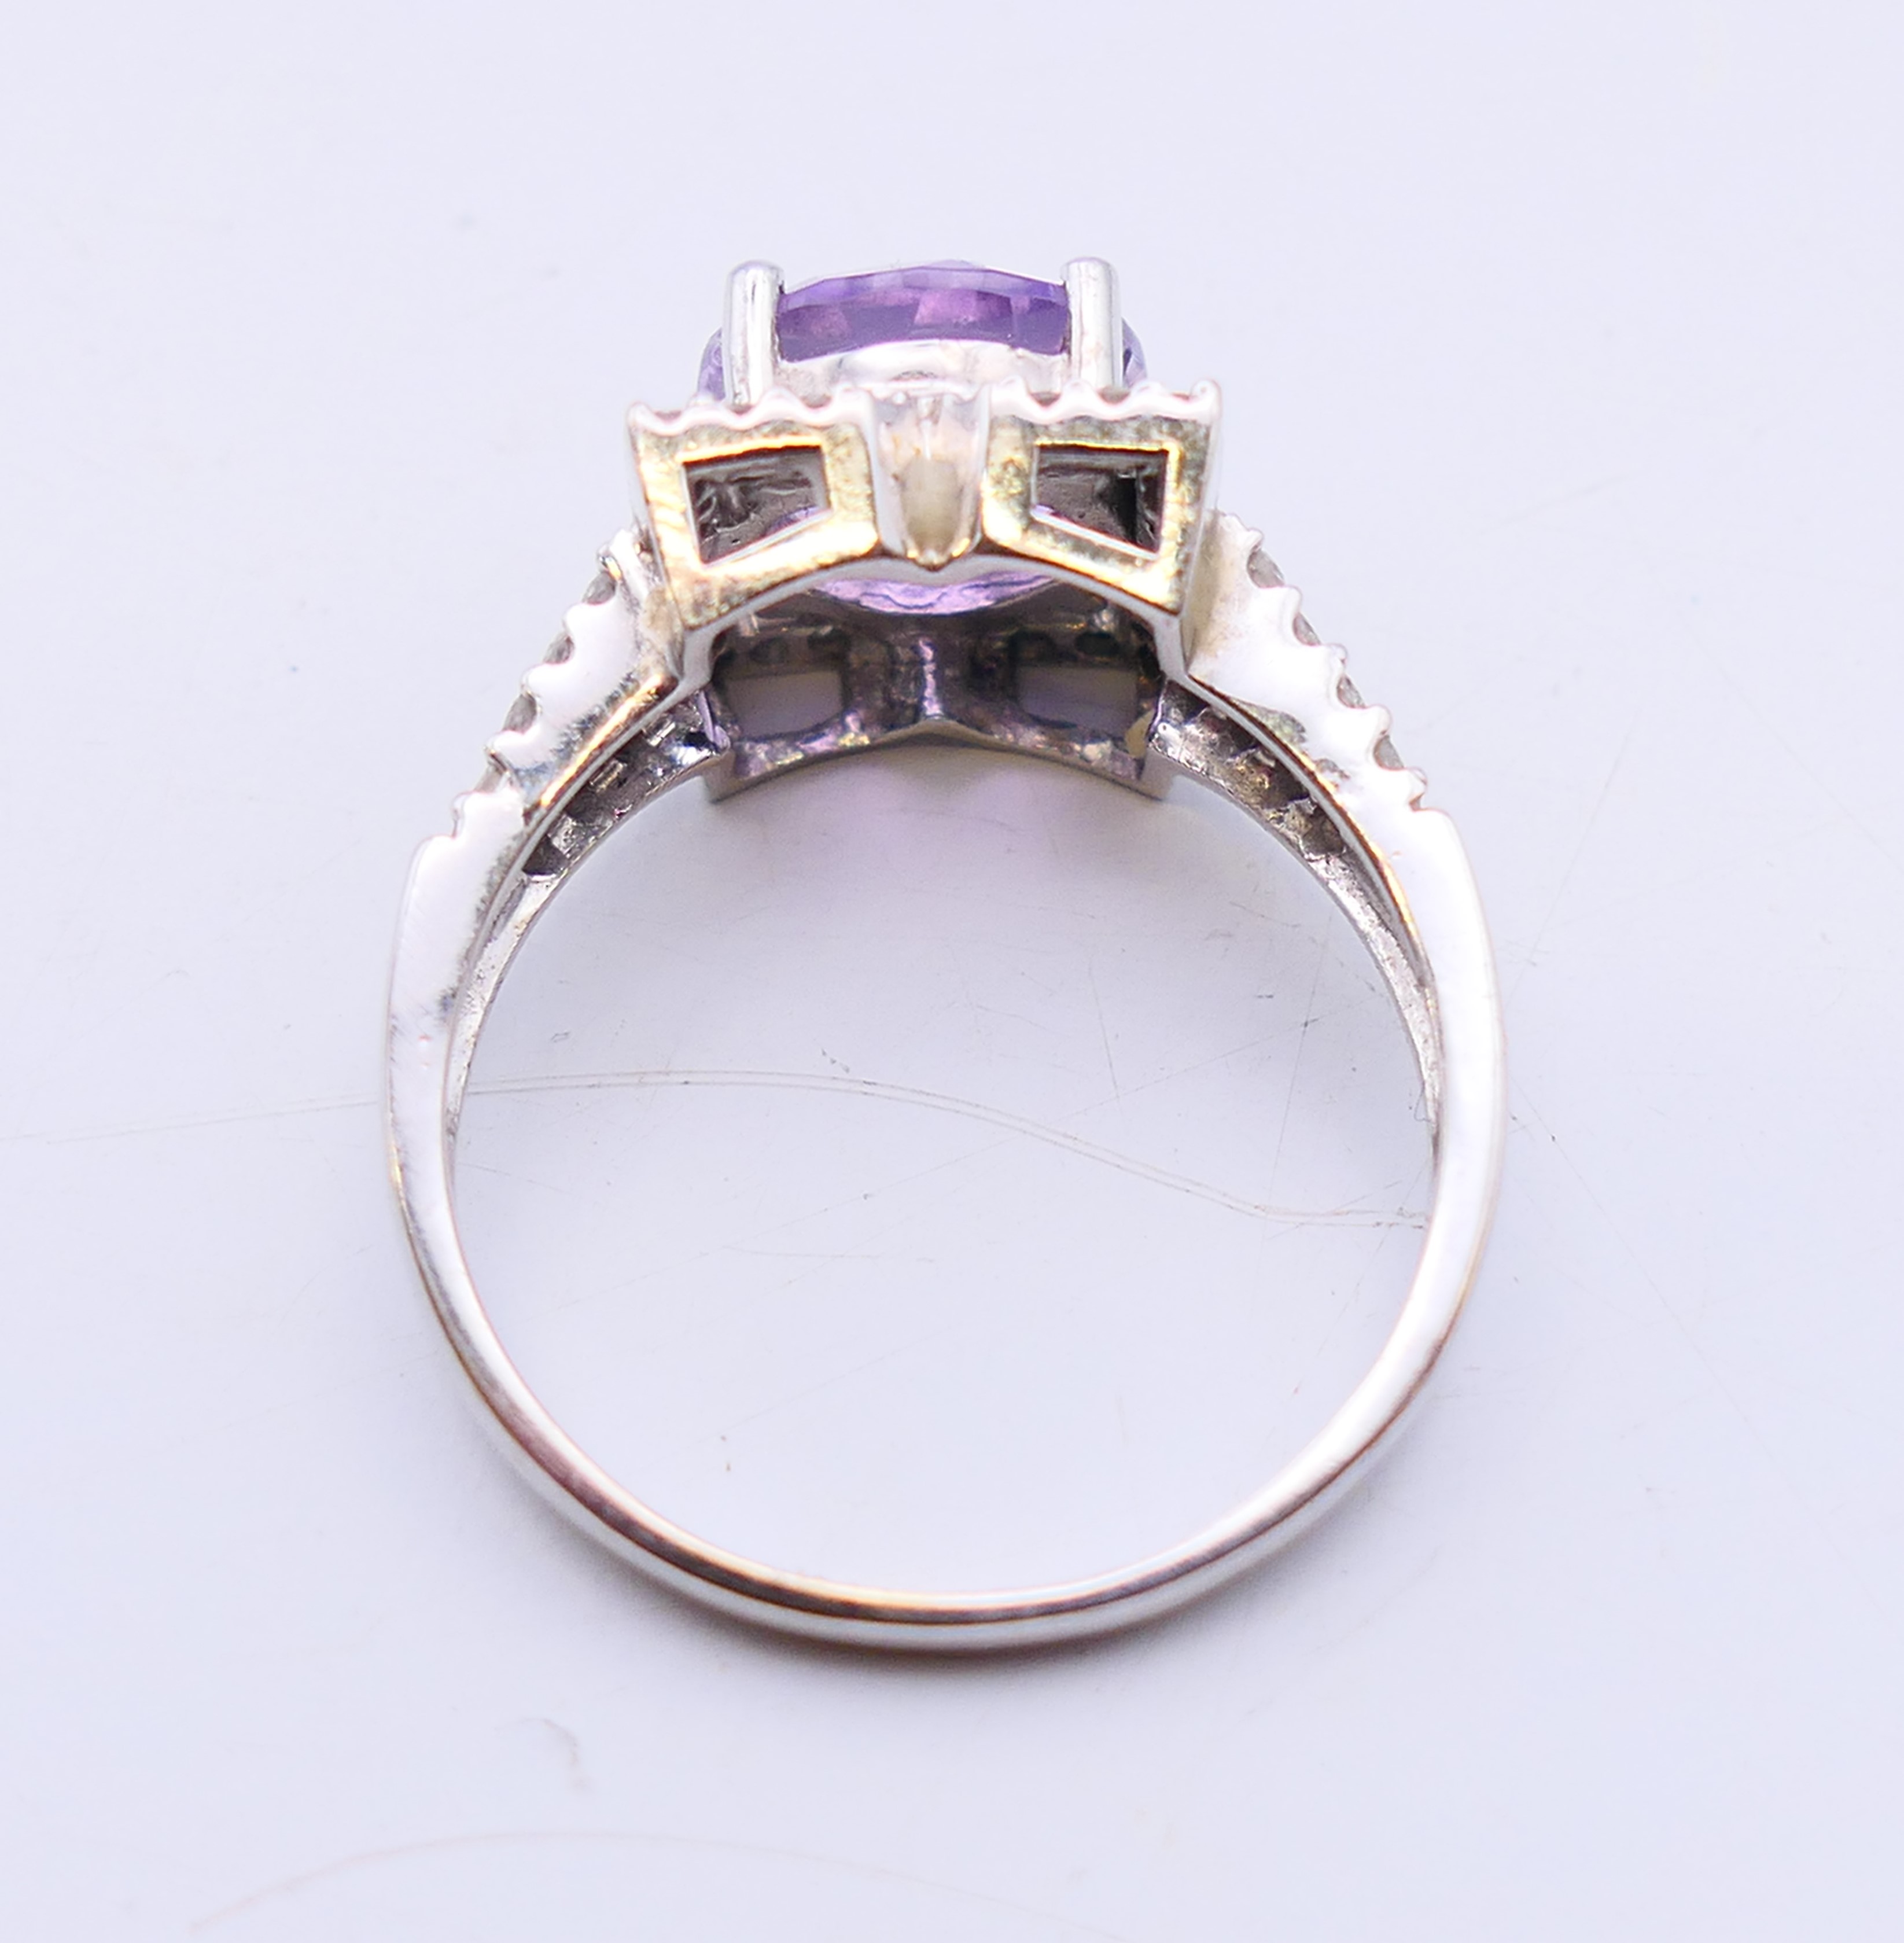 A 9 ct white gold, amethyst and diamond ring. 4.4 grammes. Ring size Q/R. - Image 4 of 5